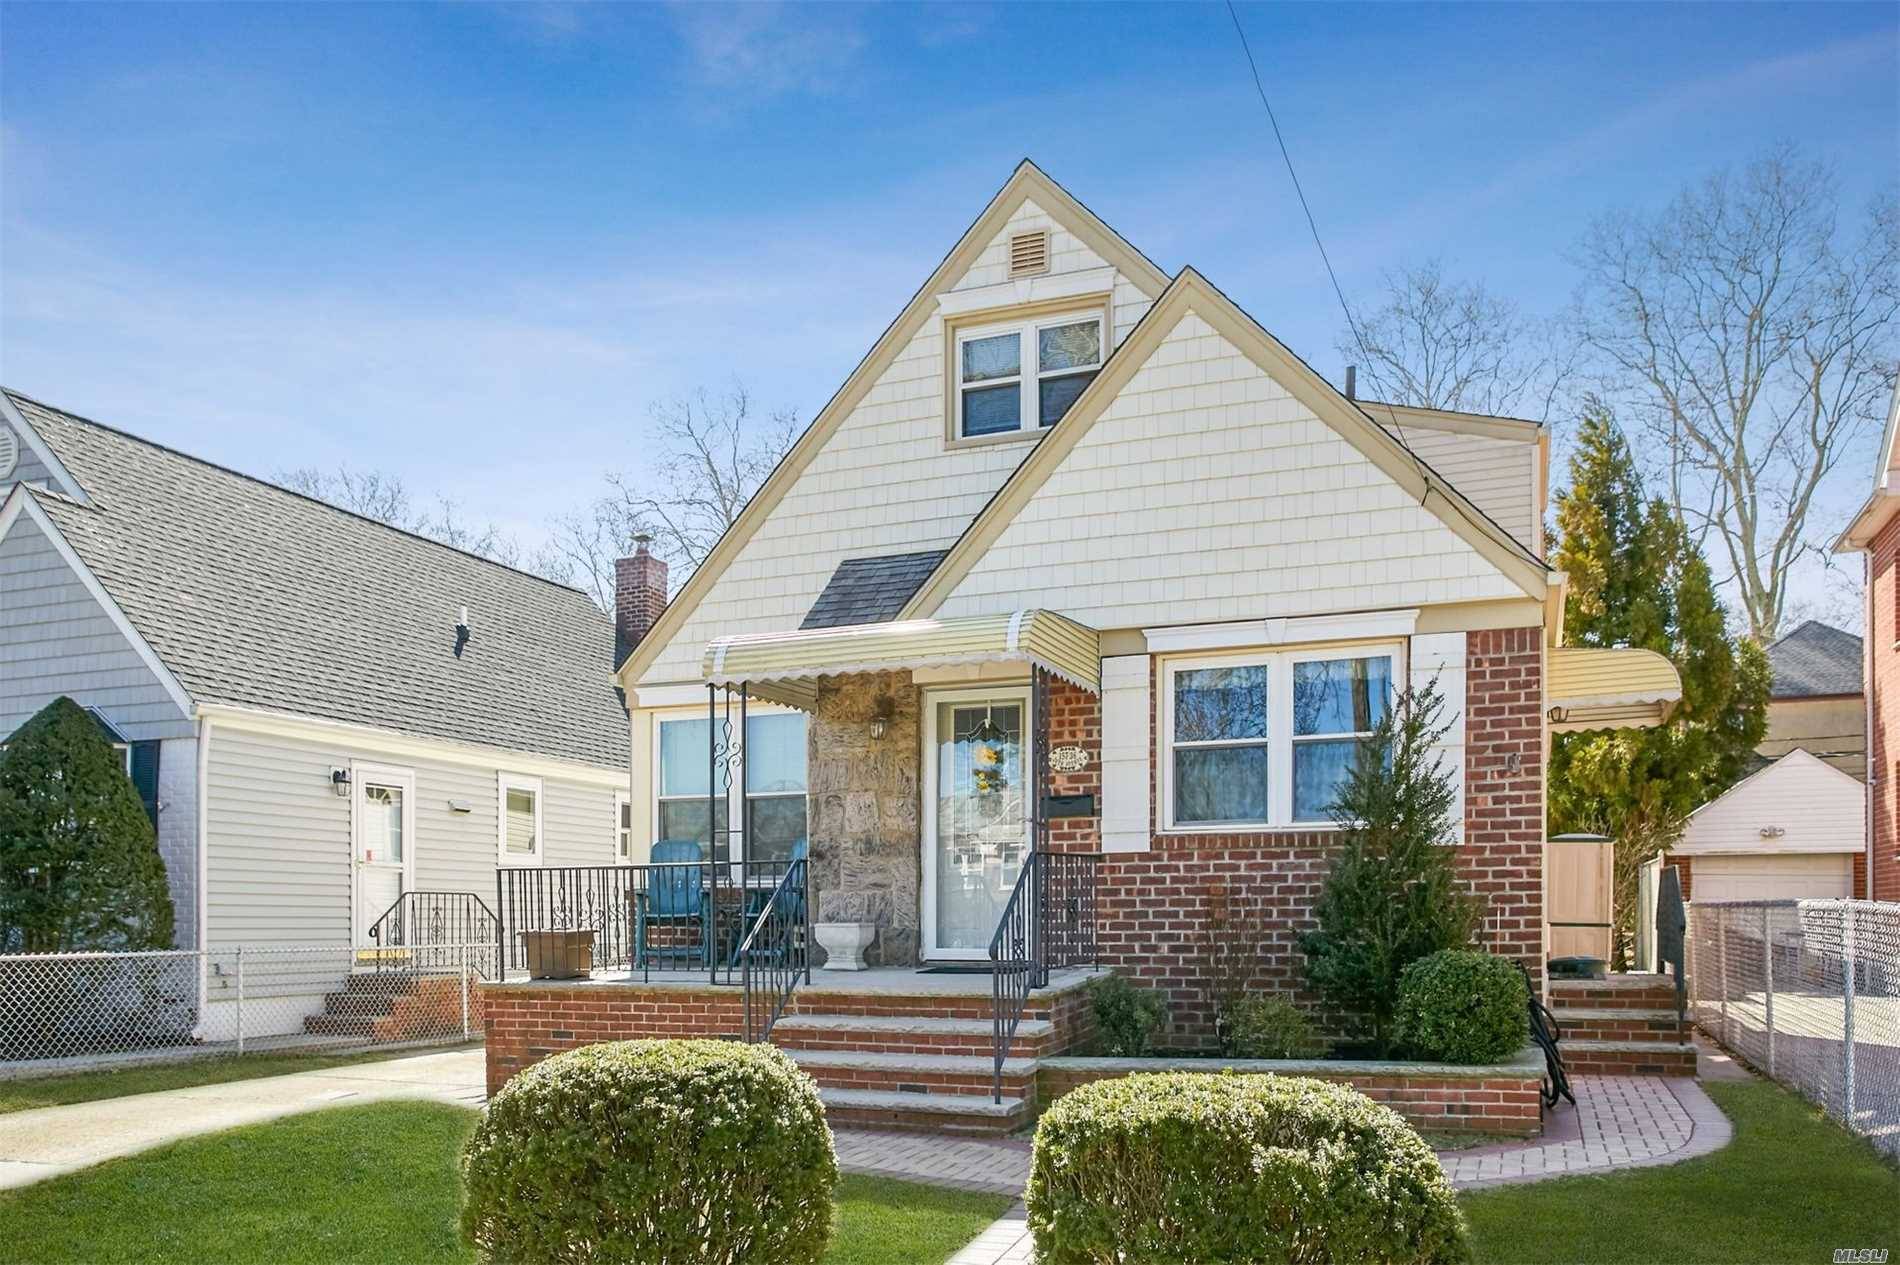 Bright, clean 4 BR, 2 full bath Cape in desirable area of Flushing North.